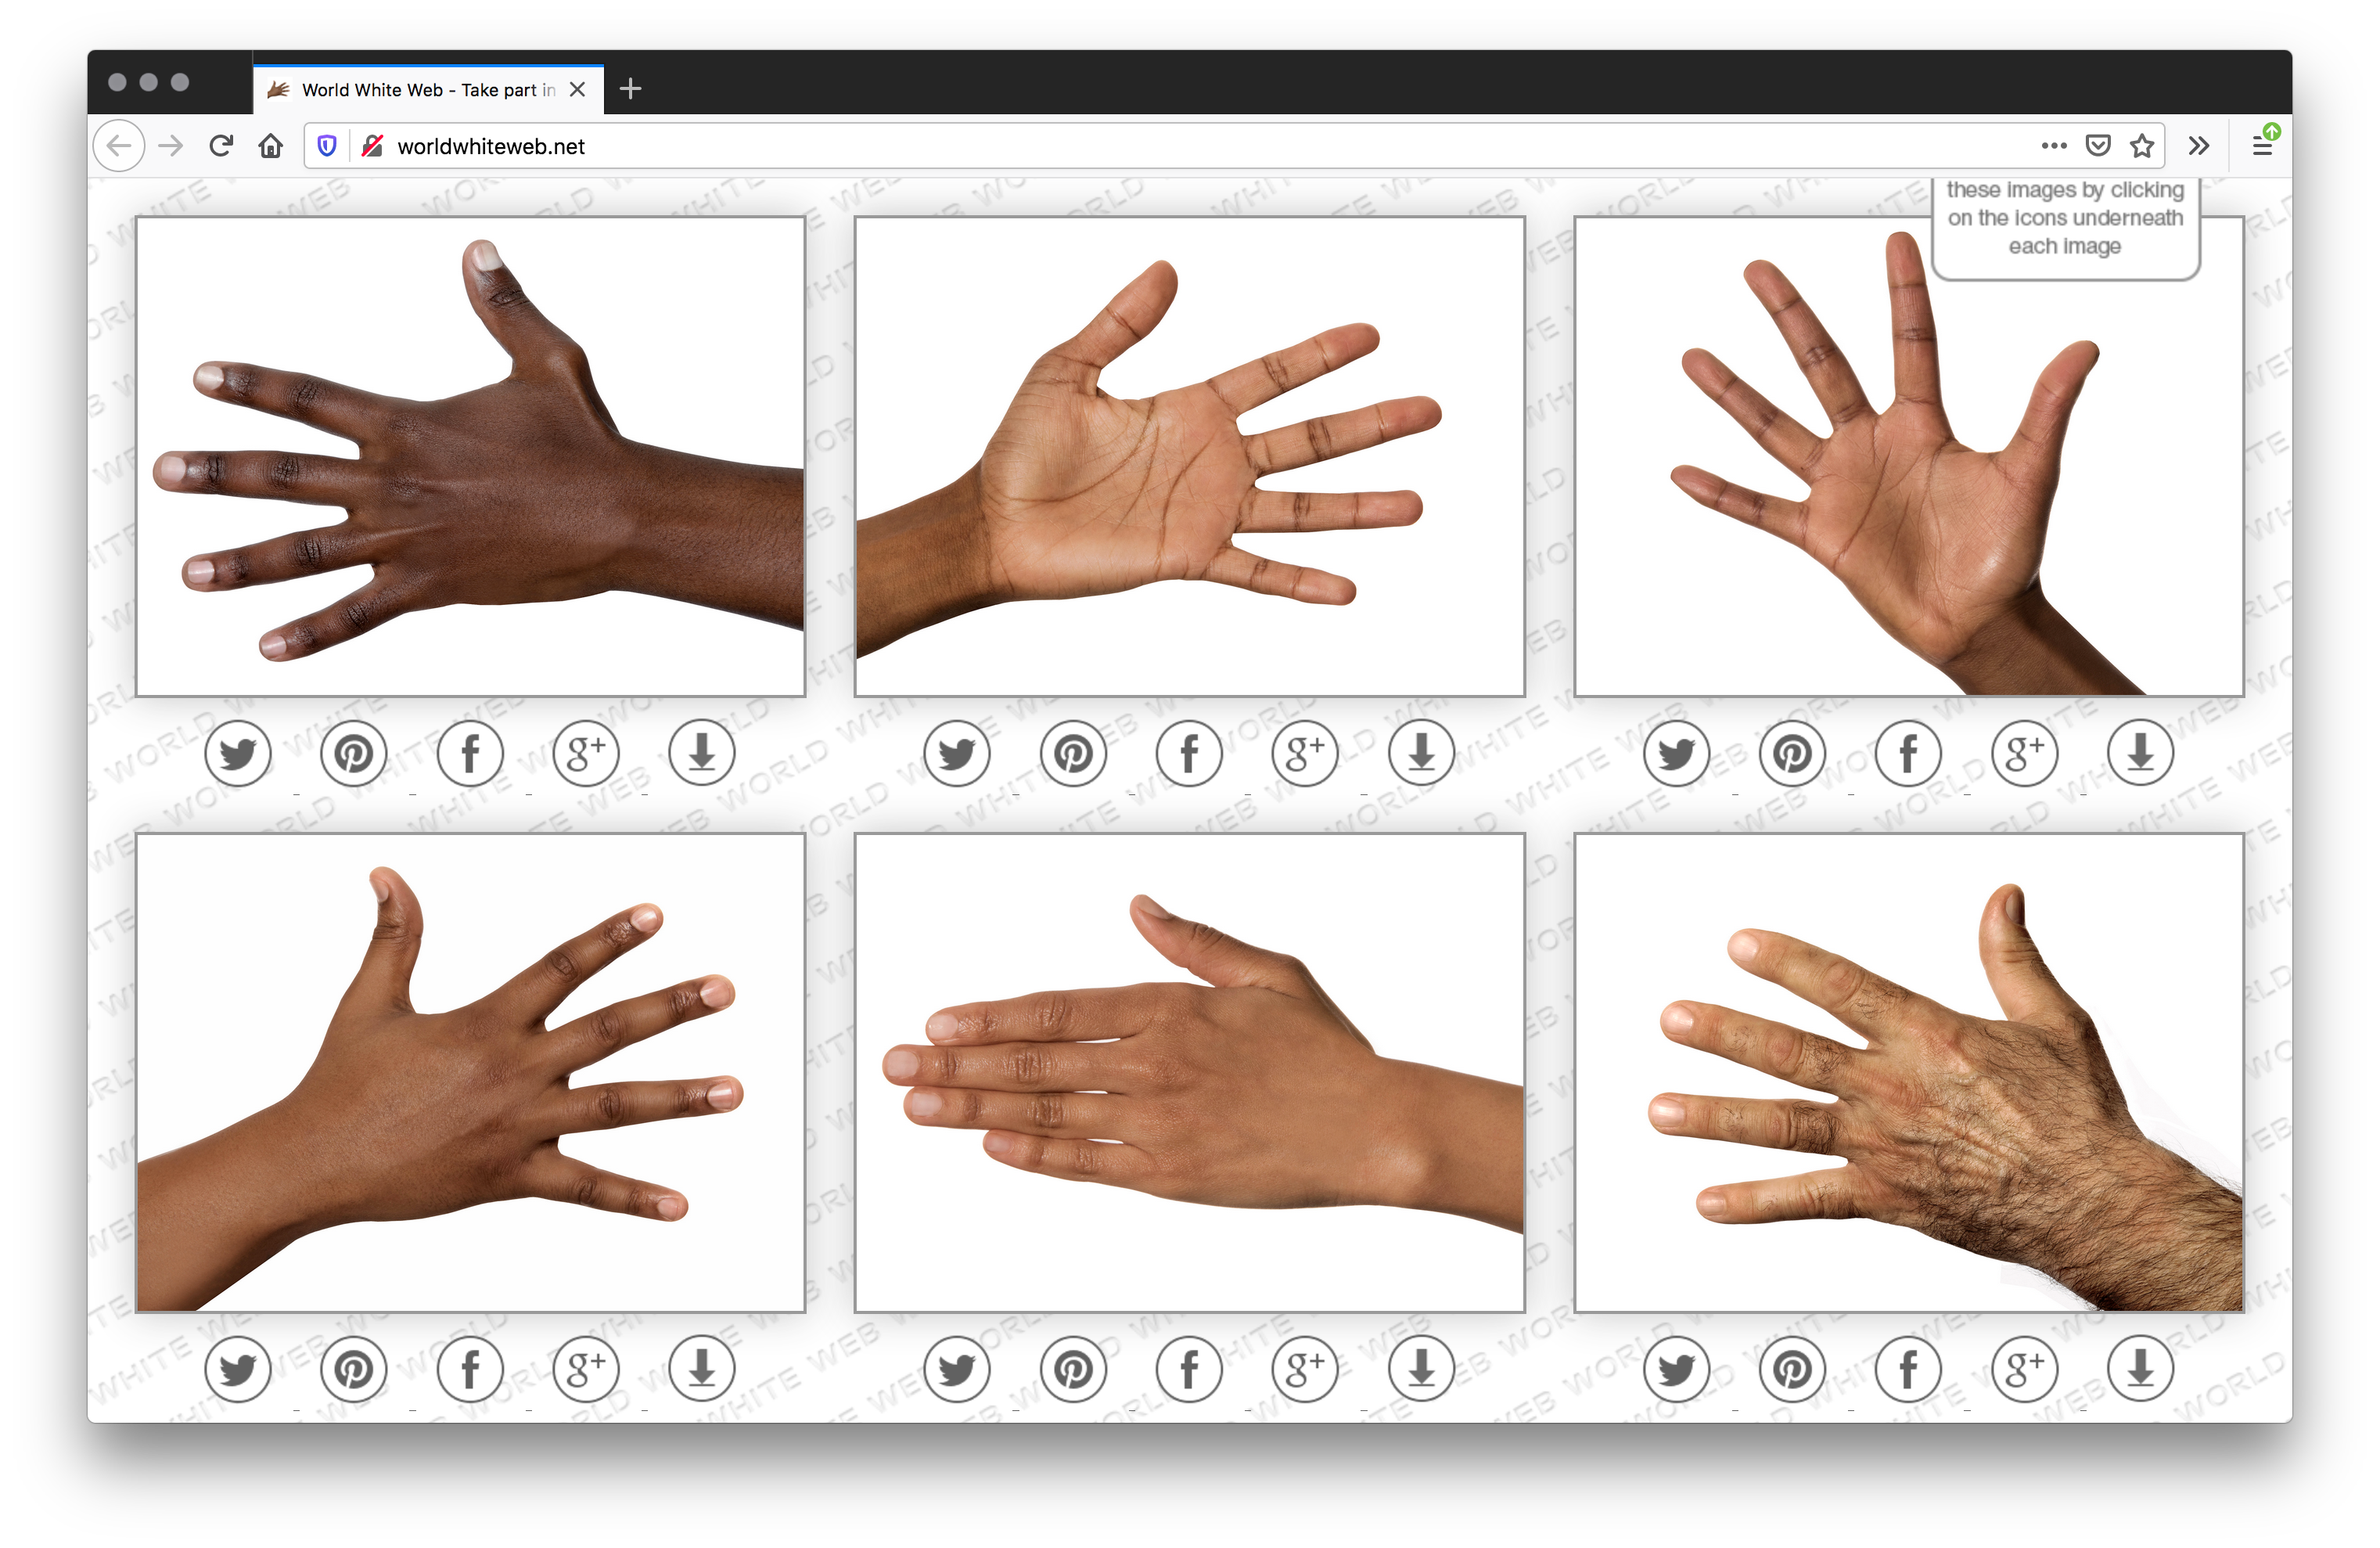 Screenshot of two rows of six different skin toned hands showing either the back of the hands or palms in white rectangles, lined by social media icons on the bottom. The background is diagonally tiled "white web world" typed.